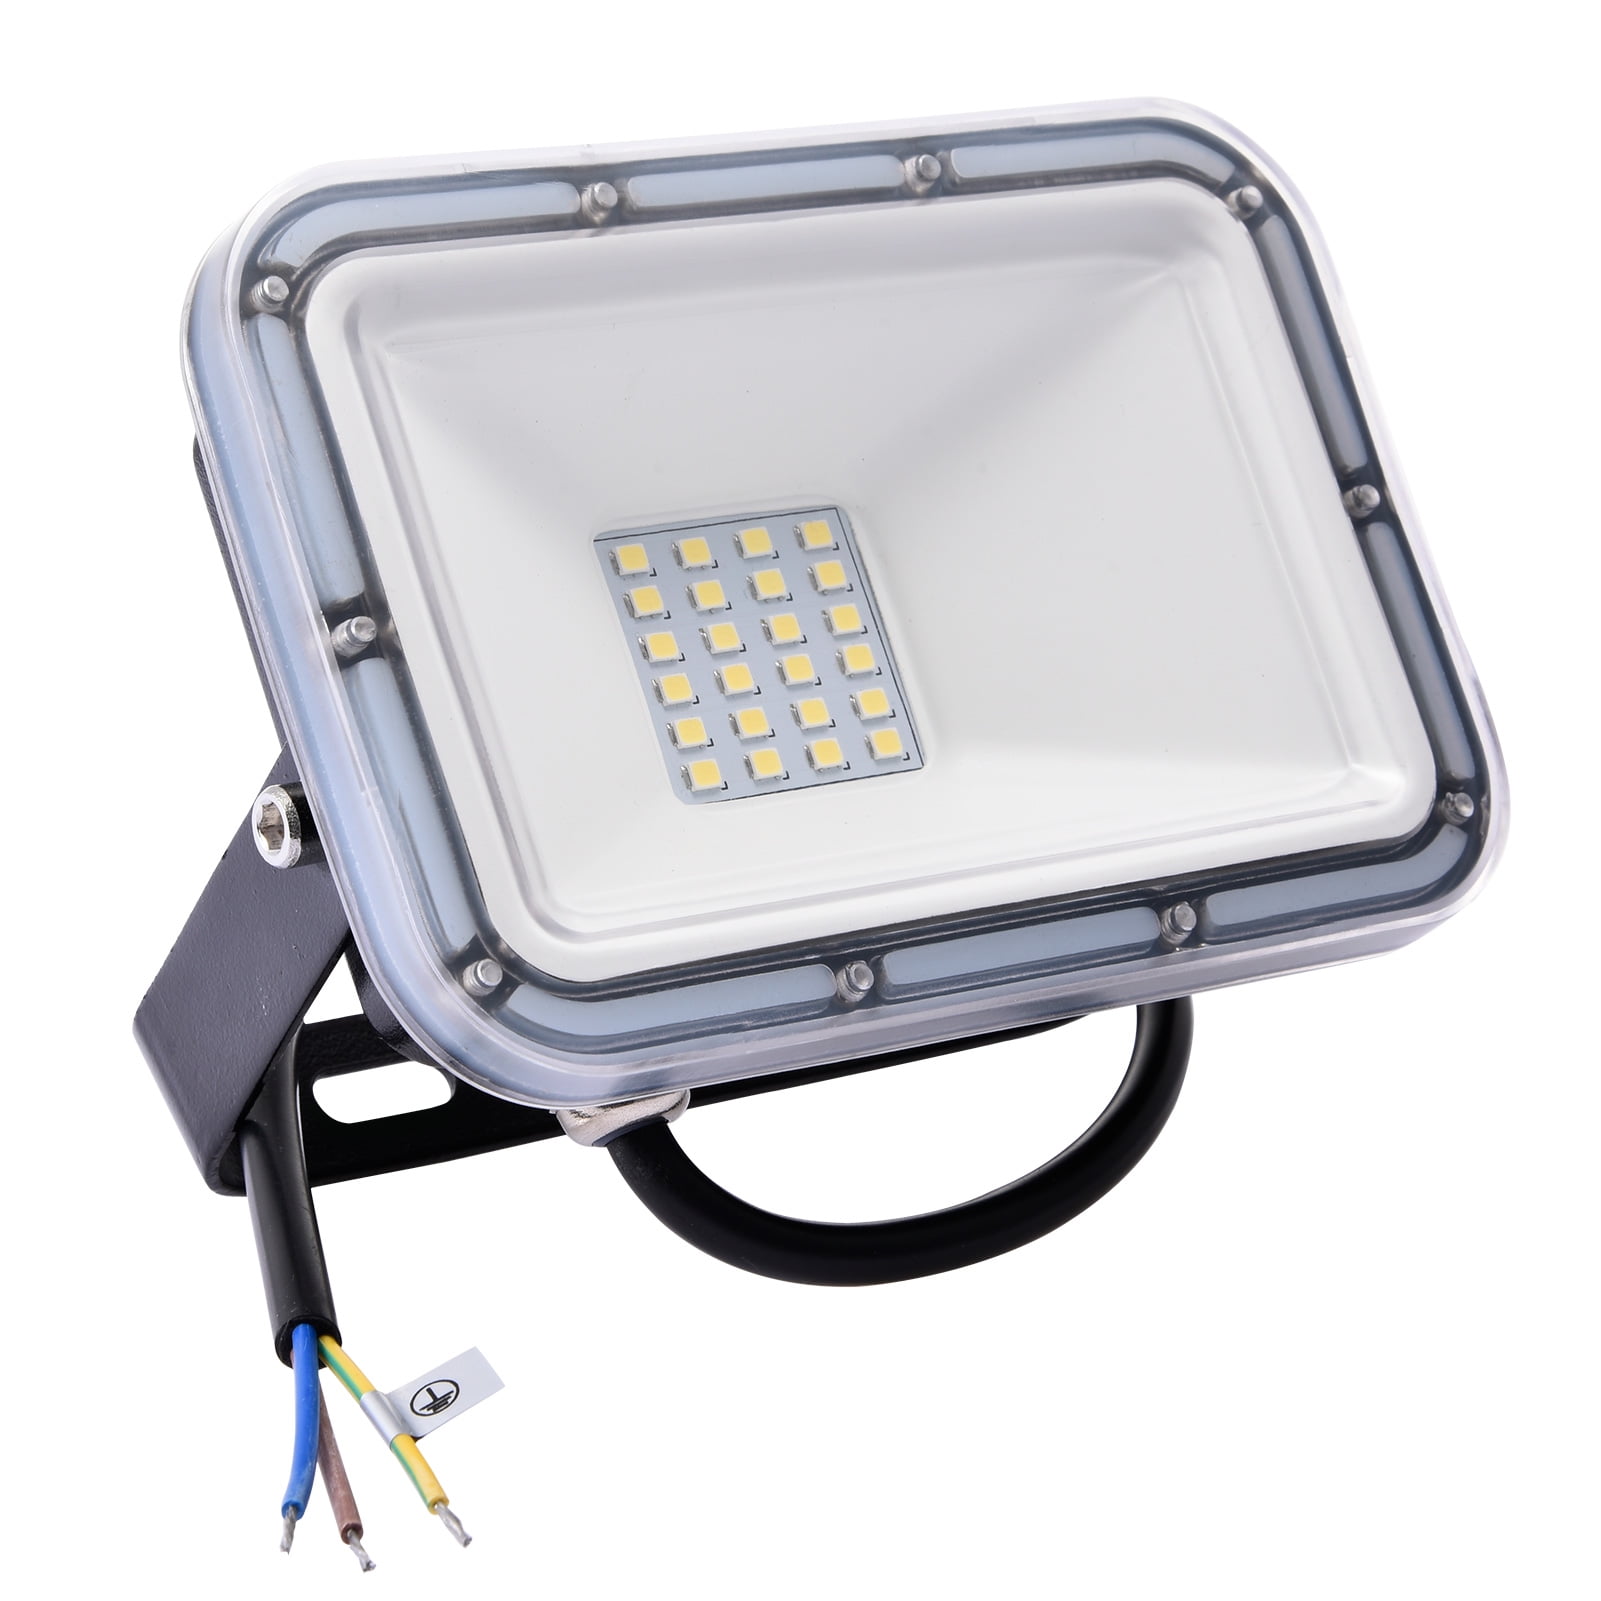 20W 30W 50W LED RGB Floodlight Outdoor Garden Security Lighting with Controller 